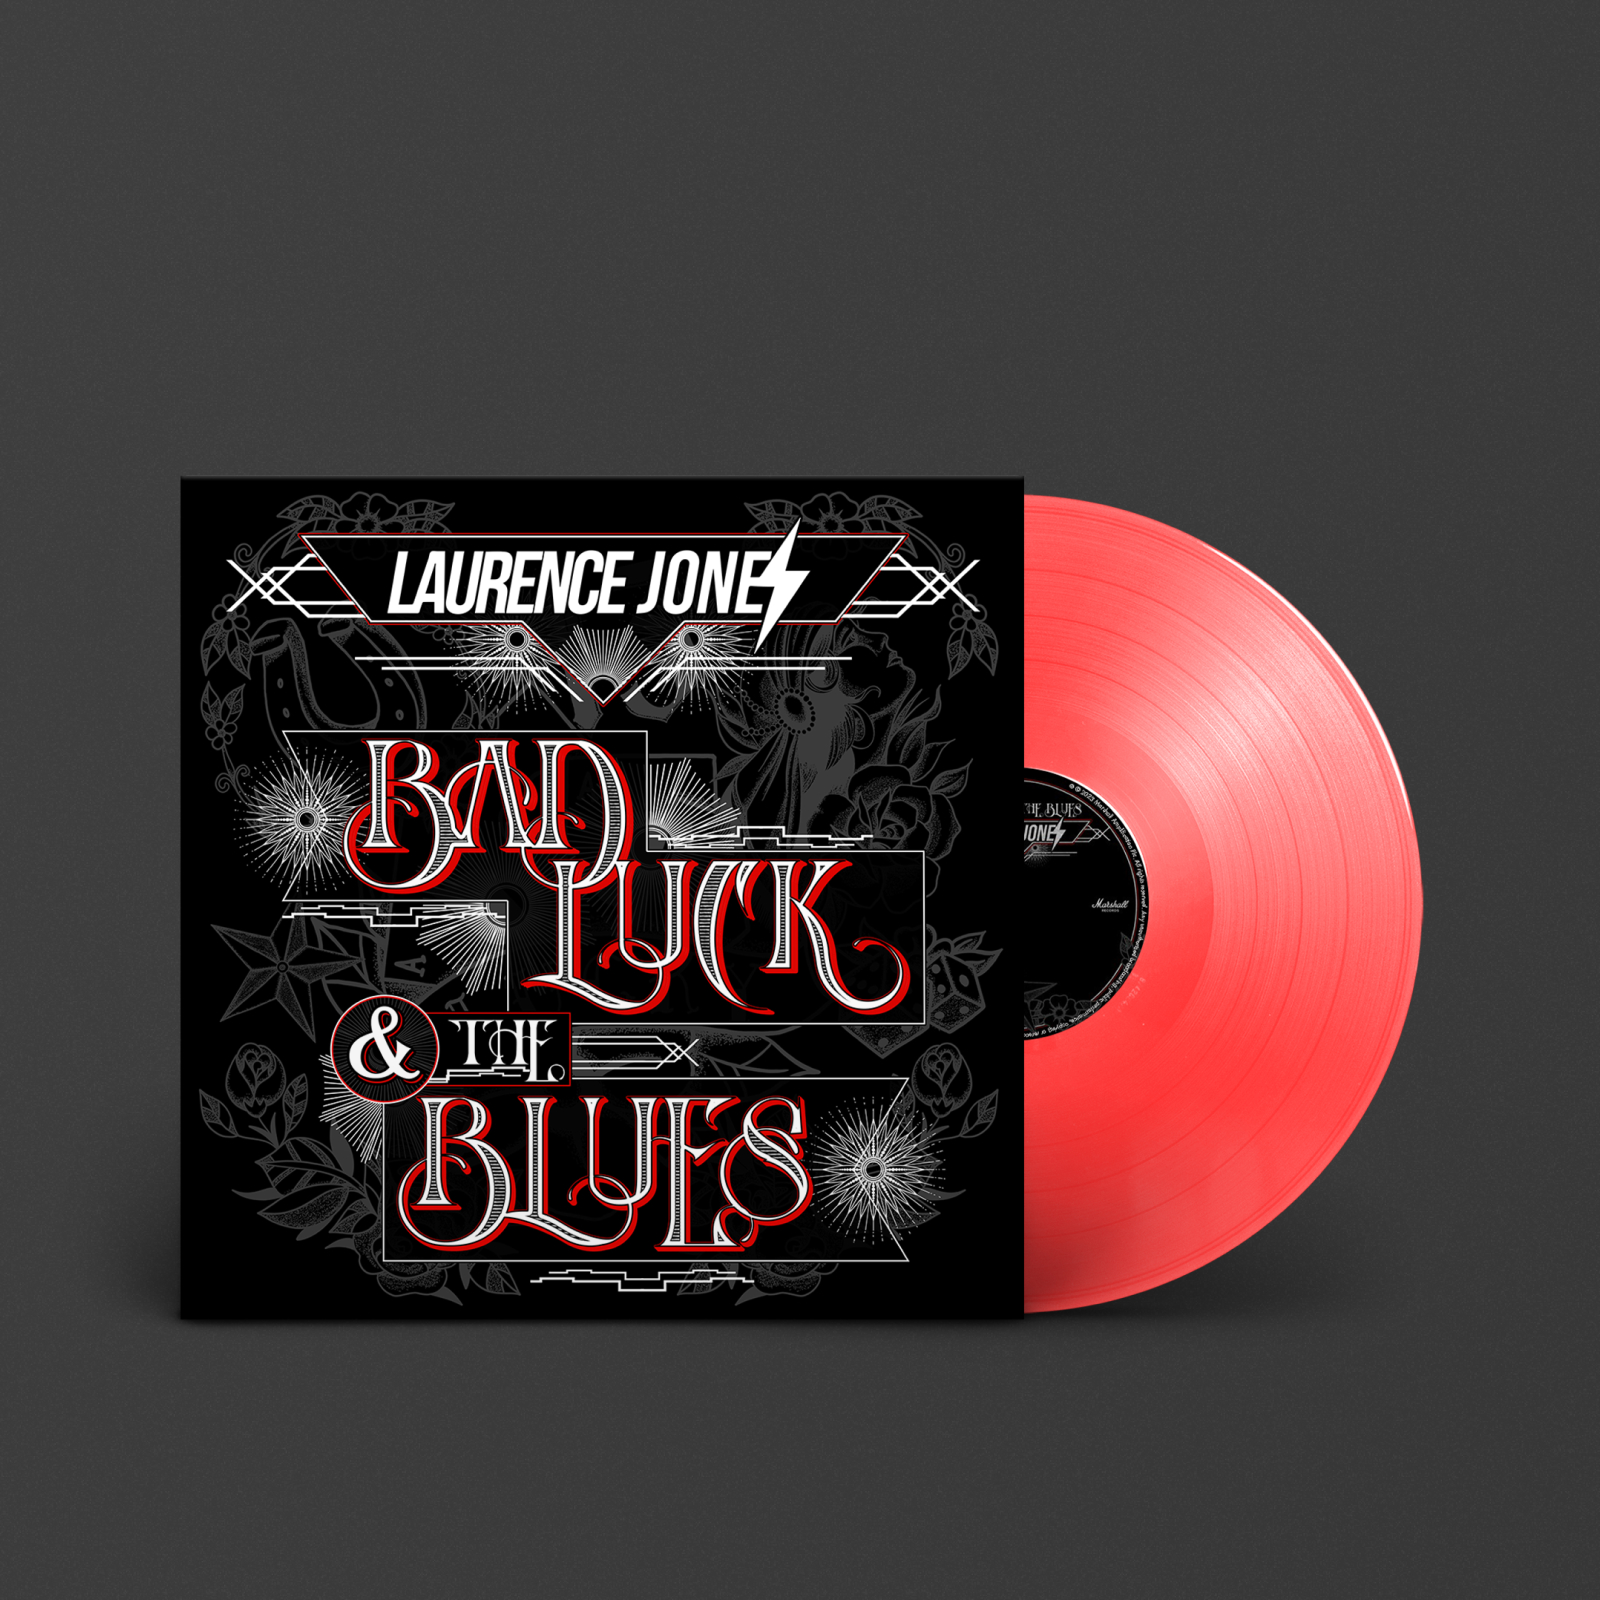 Red vinyl record 'Bad luck & the Blues' by 'Laurence Jones'.